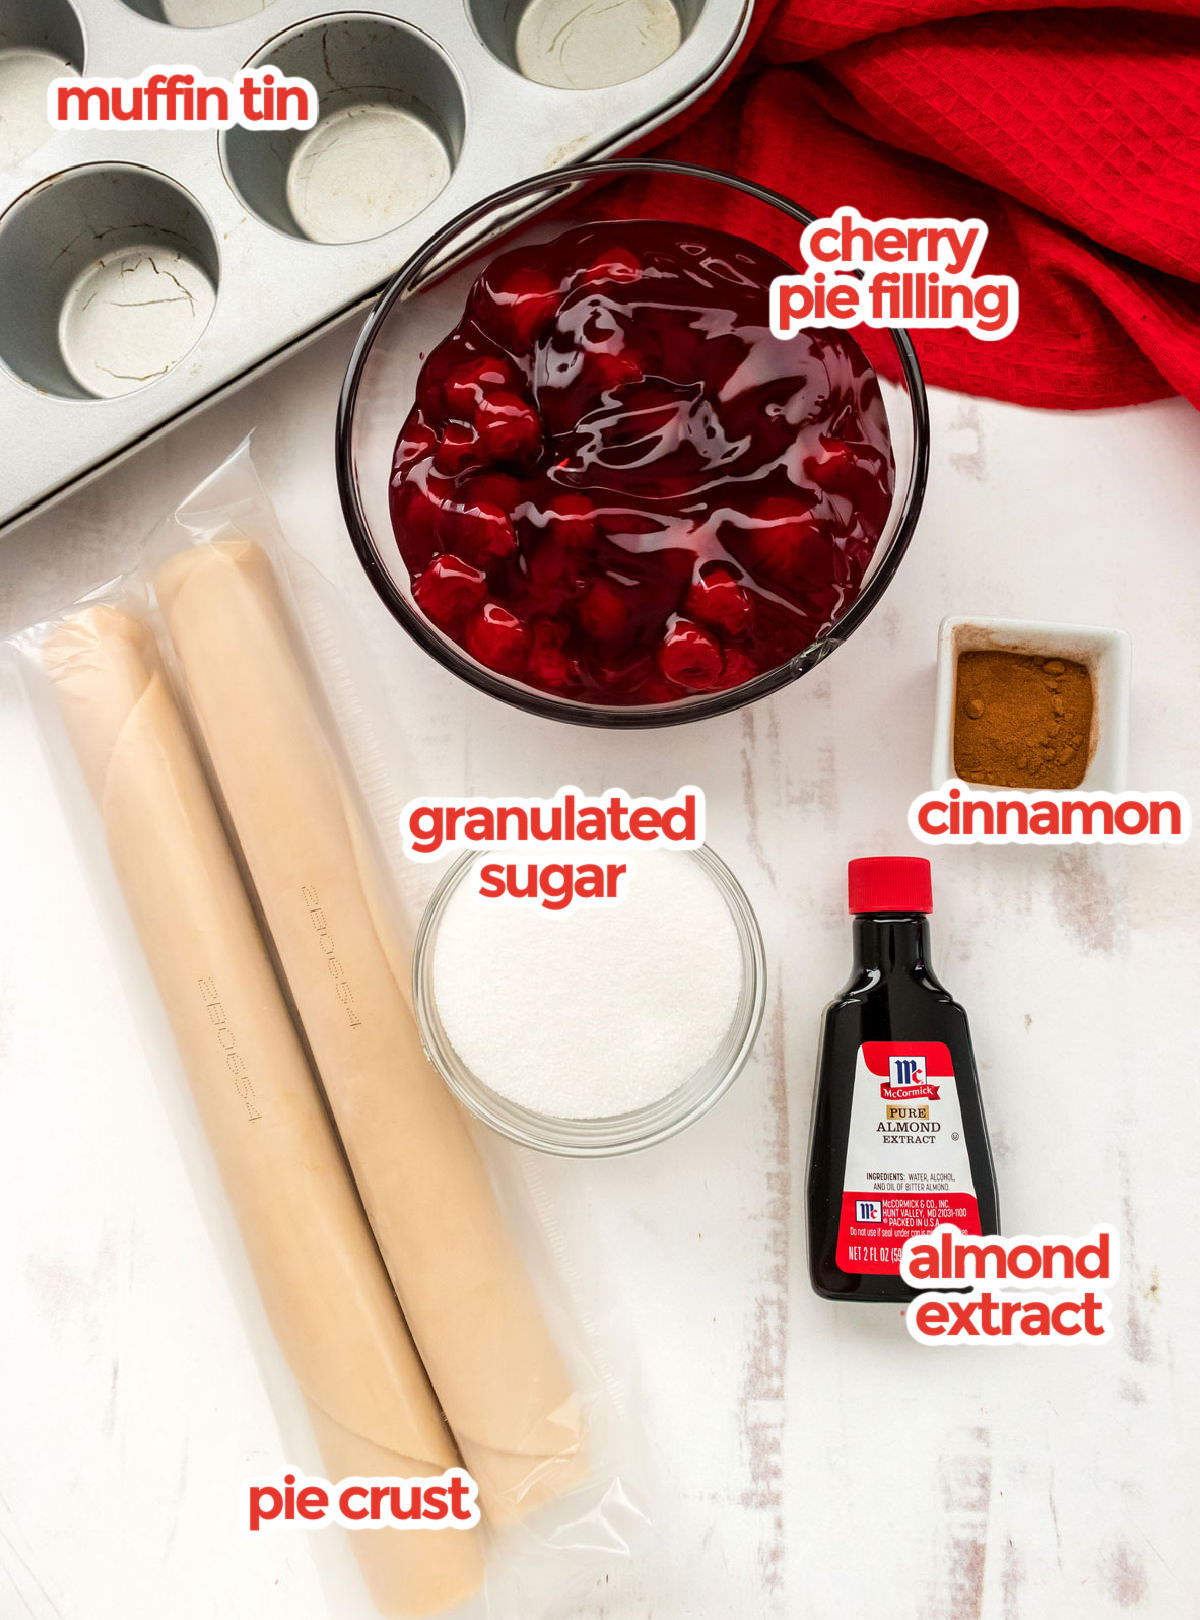 All the ingredients you will need to make Mini Cherry Pies including canned Cherry Pie Filling, Cinnamon, Almond Extract, Granulated Sugar and pre-made Pie Crust.